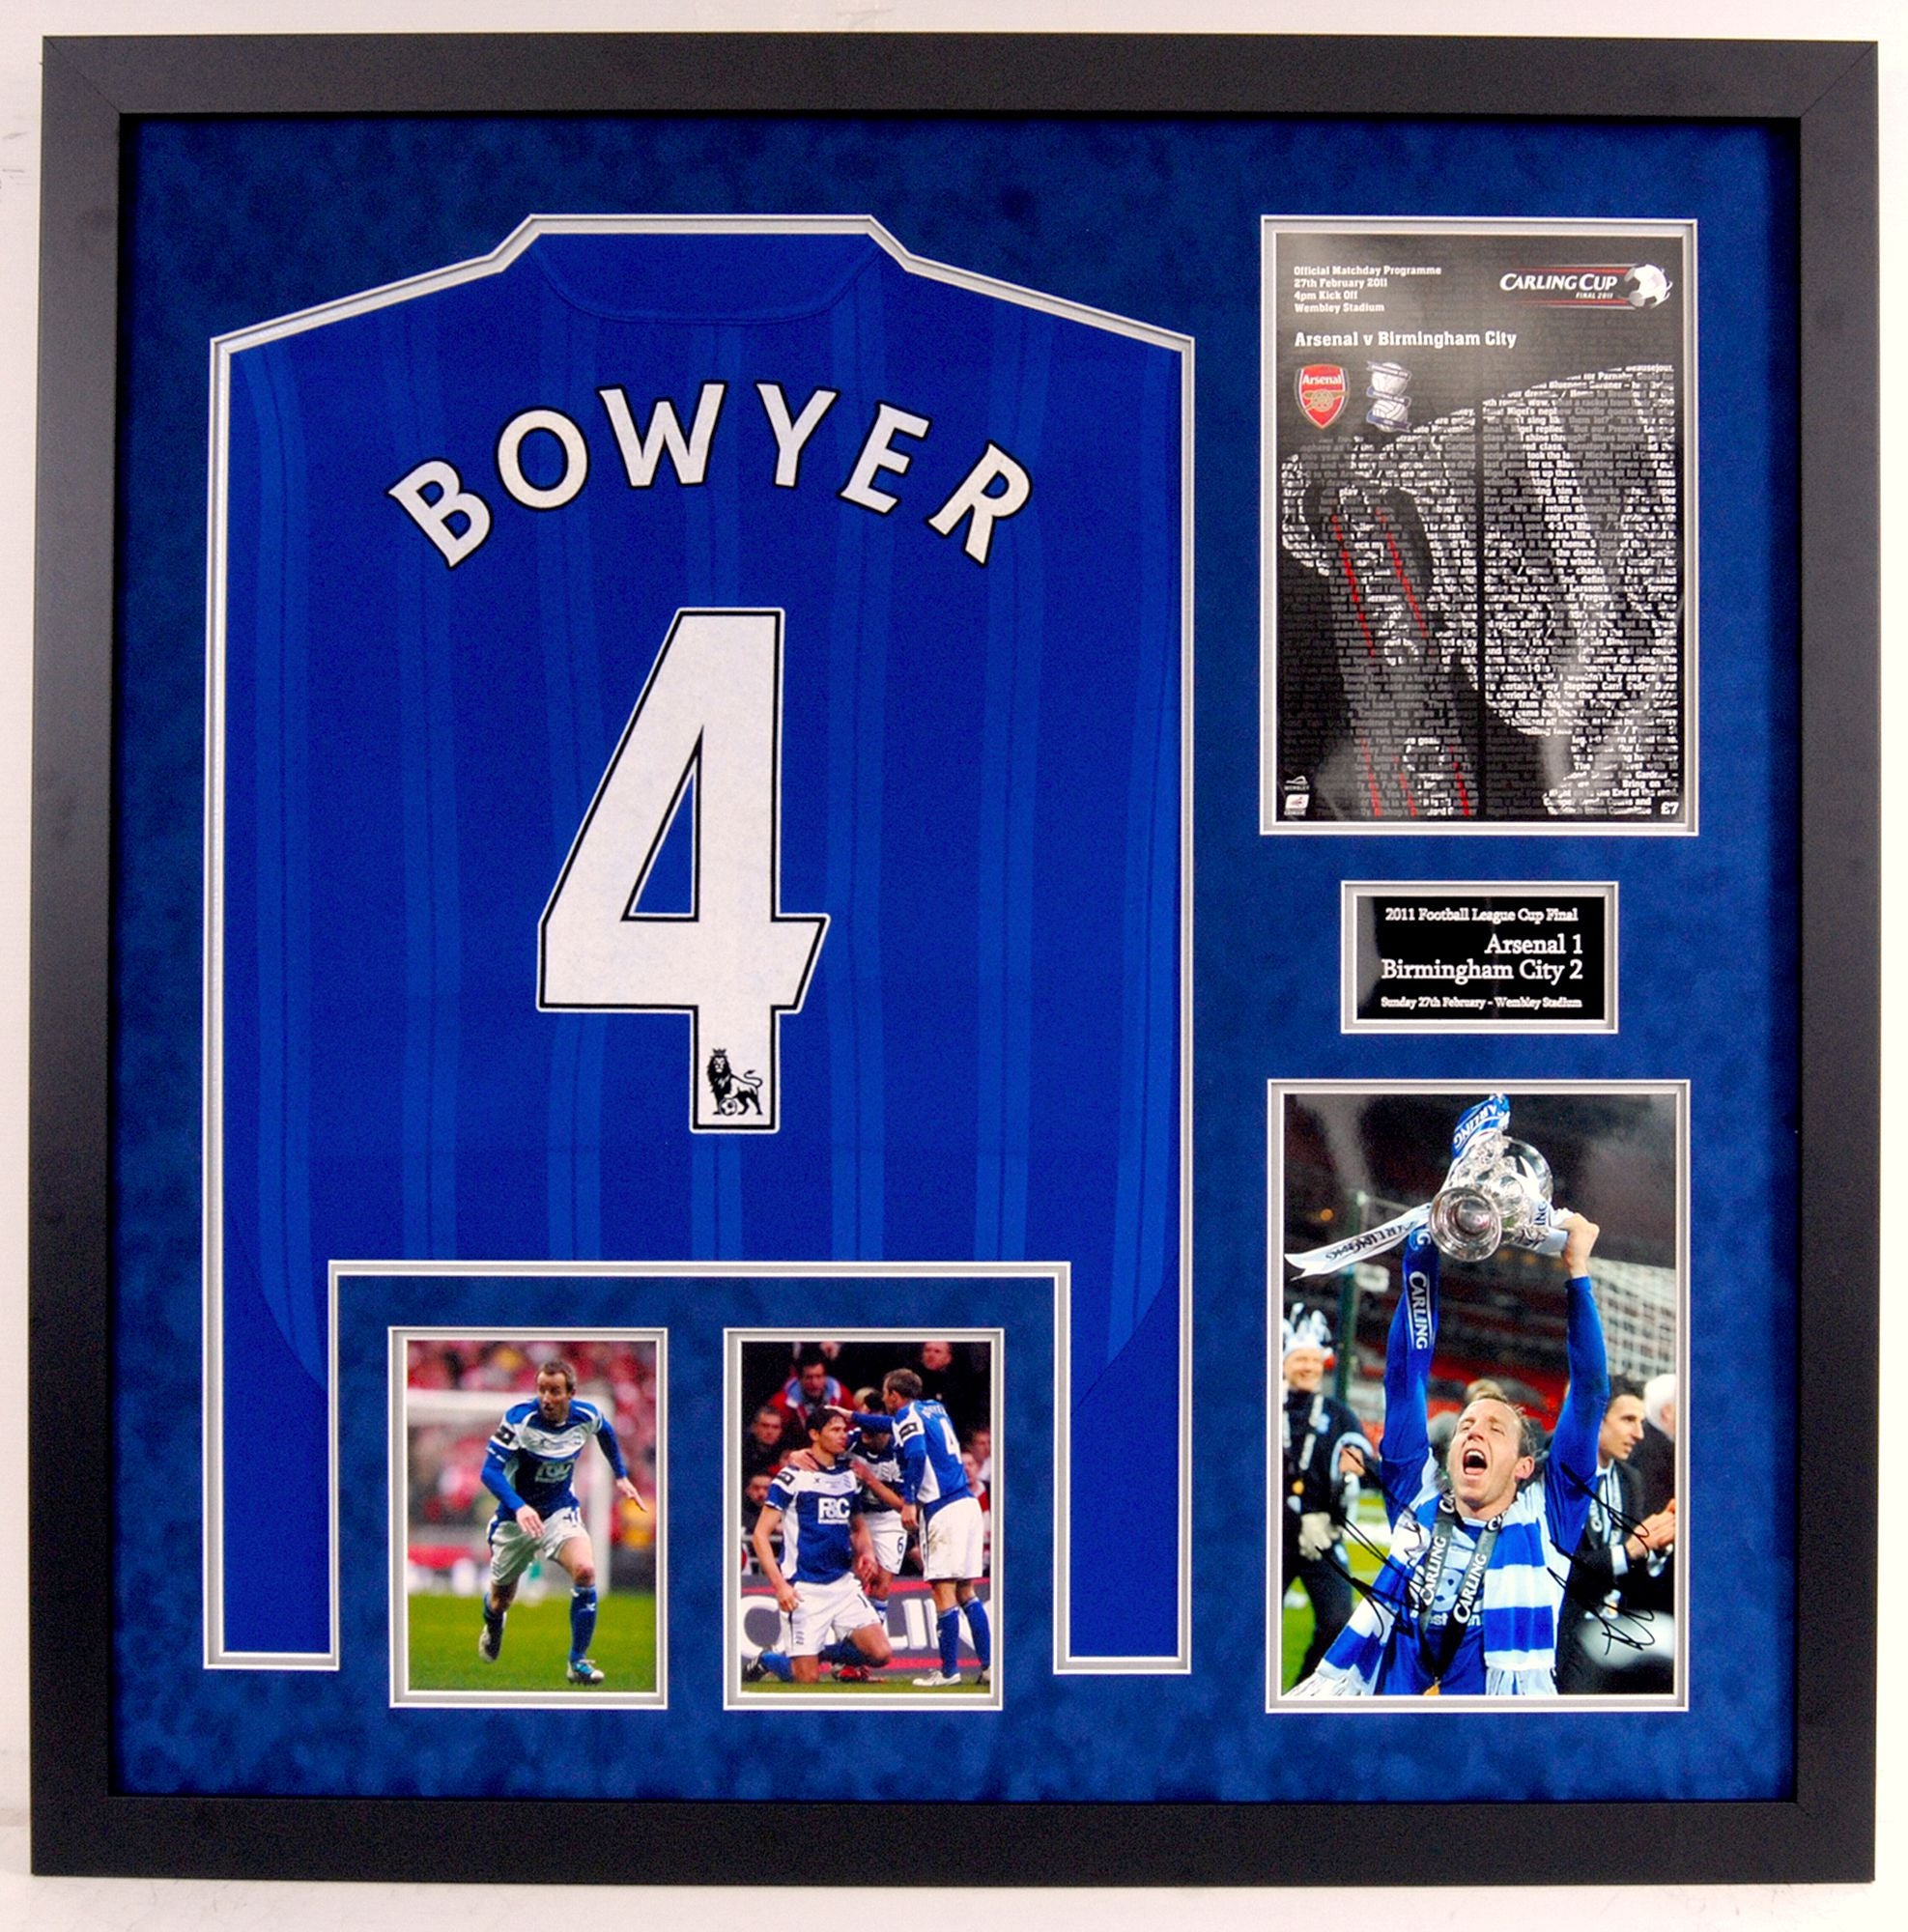 Lee Bowyer, Birmingham City Carling Cup Winner 2011 - Signed.  Free UK shipping